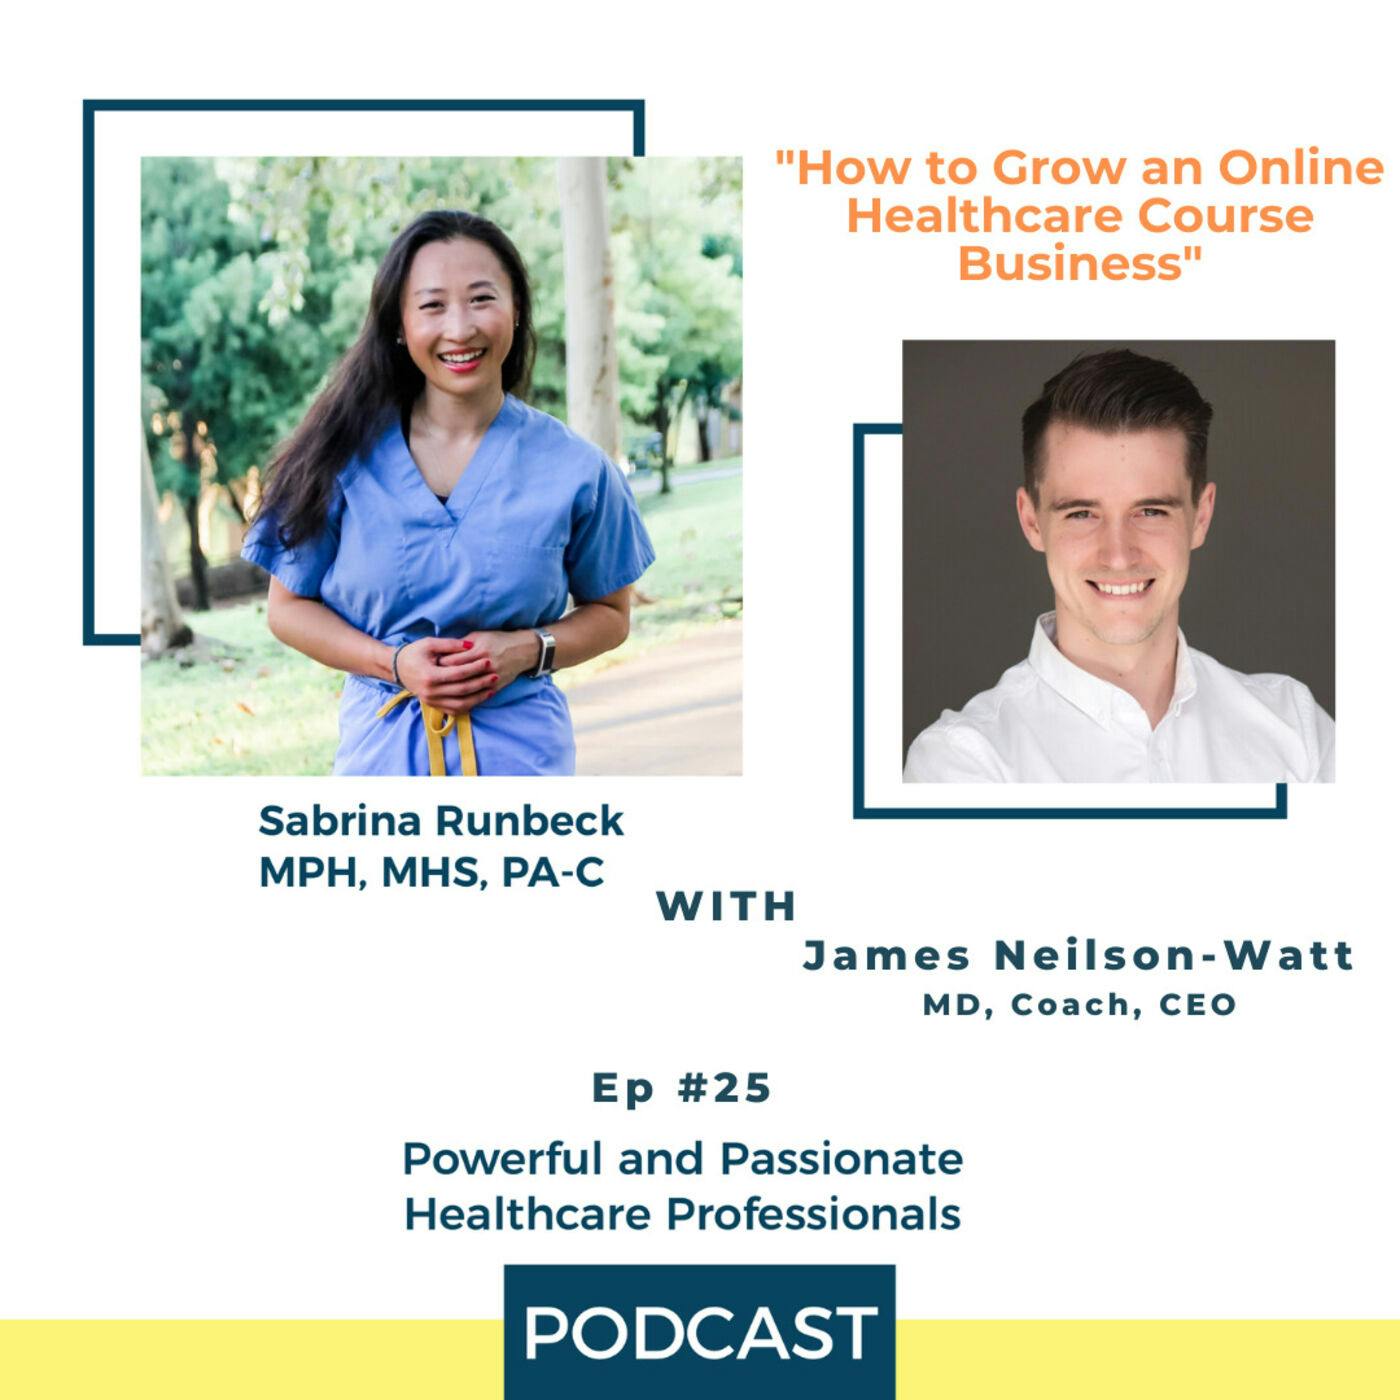 Ep 25 – How To Grow an Online Healthcare Course Business with James Neilson-Watt